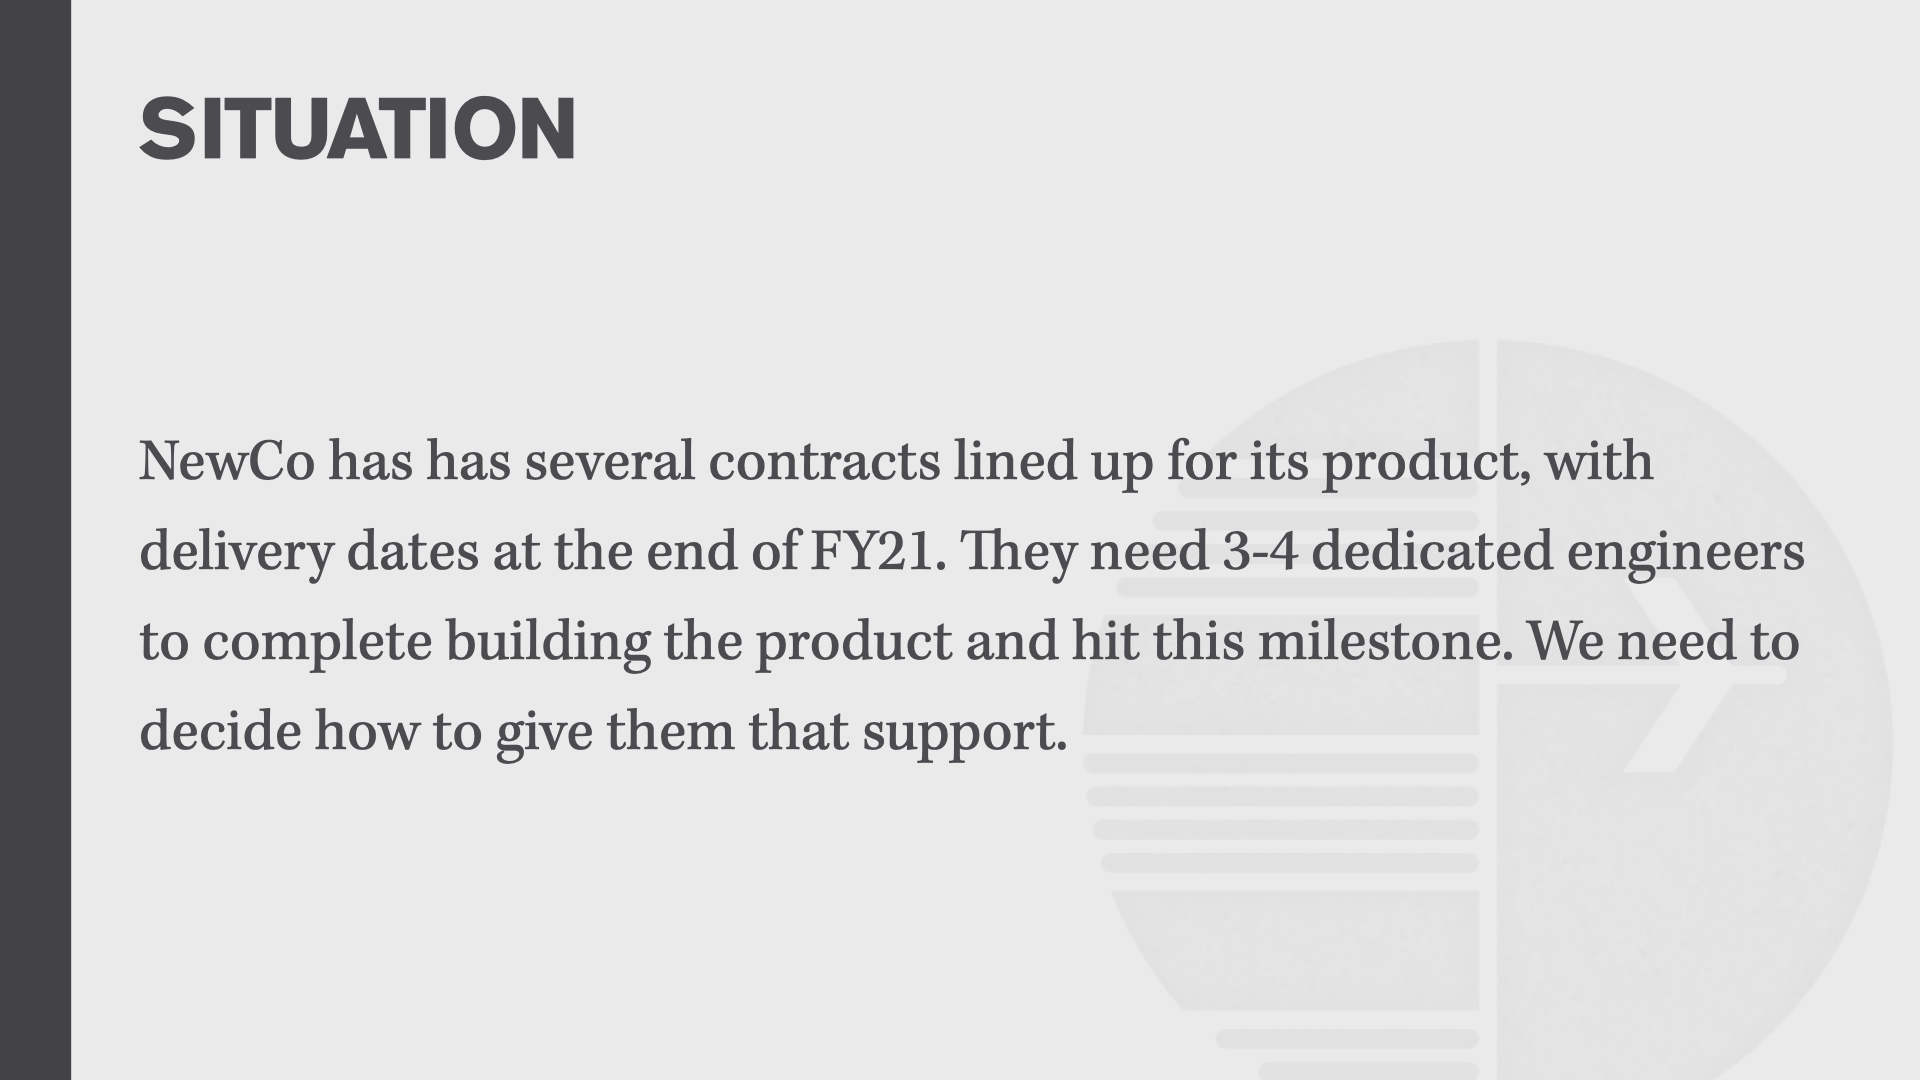 SITUATION: NewCo has has several contracts lined up for its product, with delivery dates at the end of FY21. They need 3-4 dedicated engineers to complete building the product and hit the milestone. We need to decide how to give them that support.